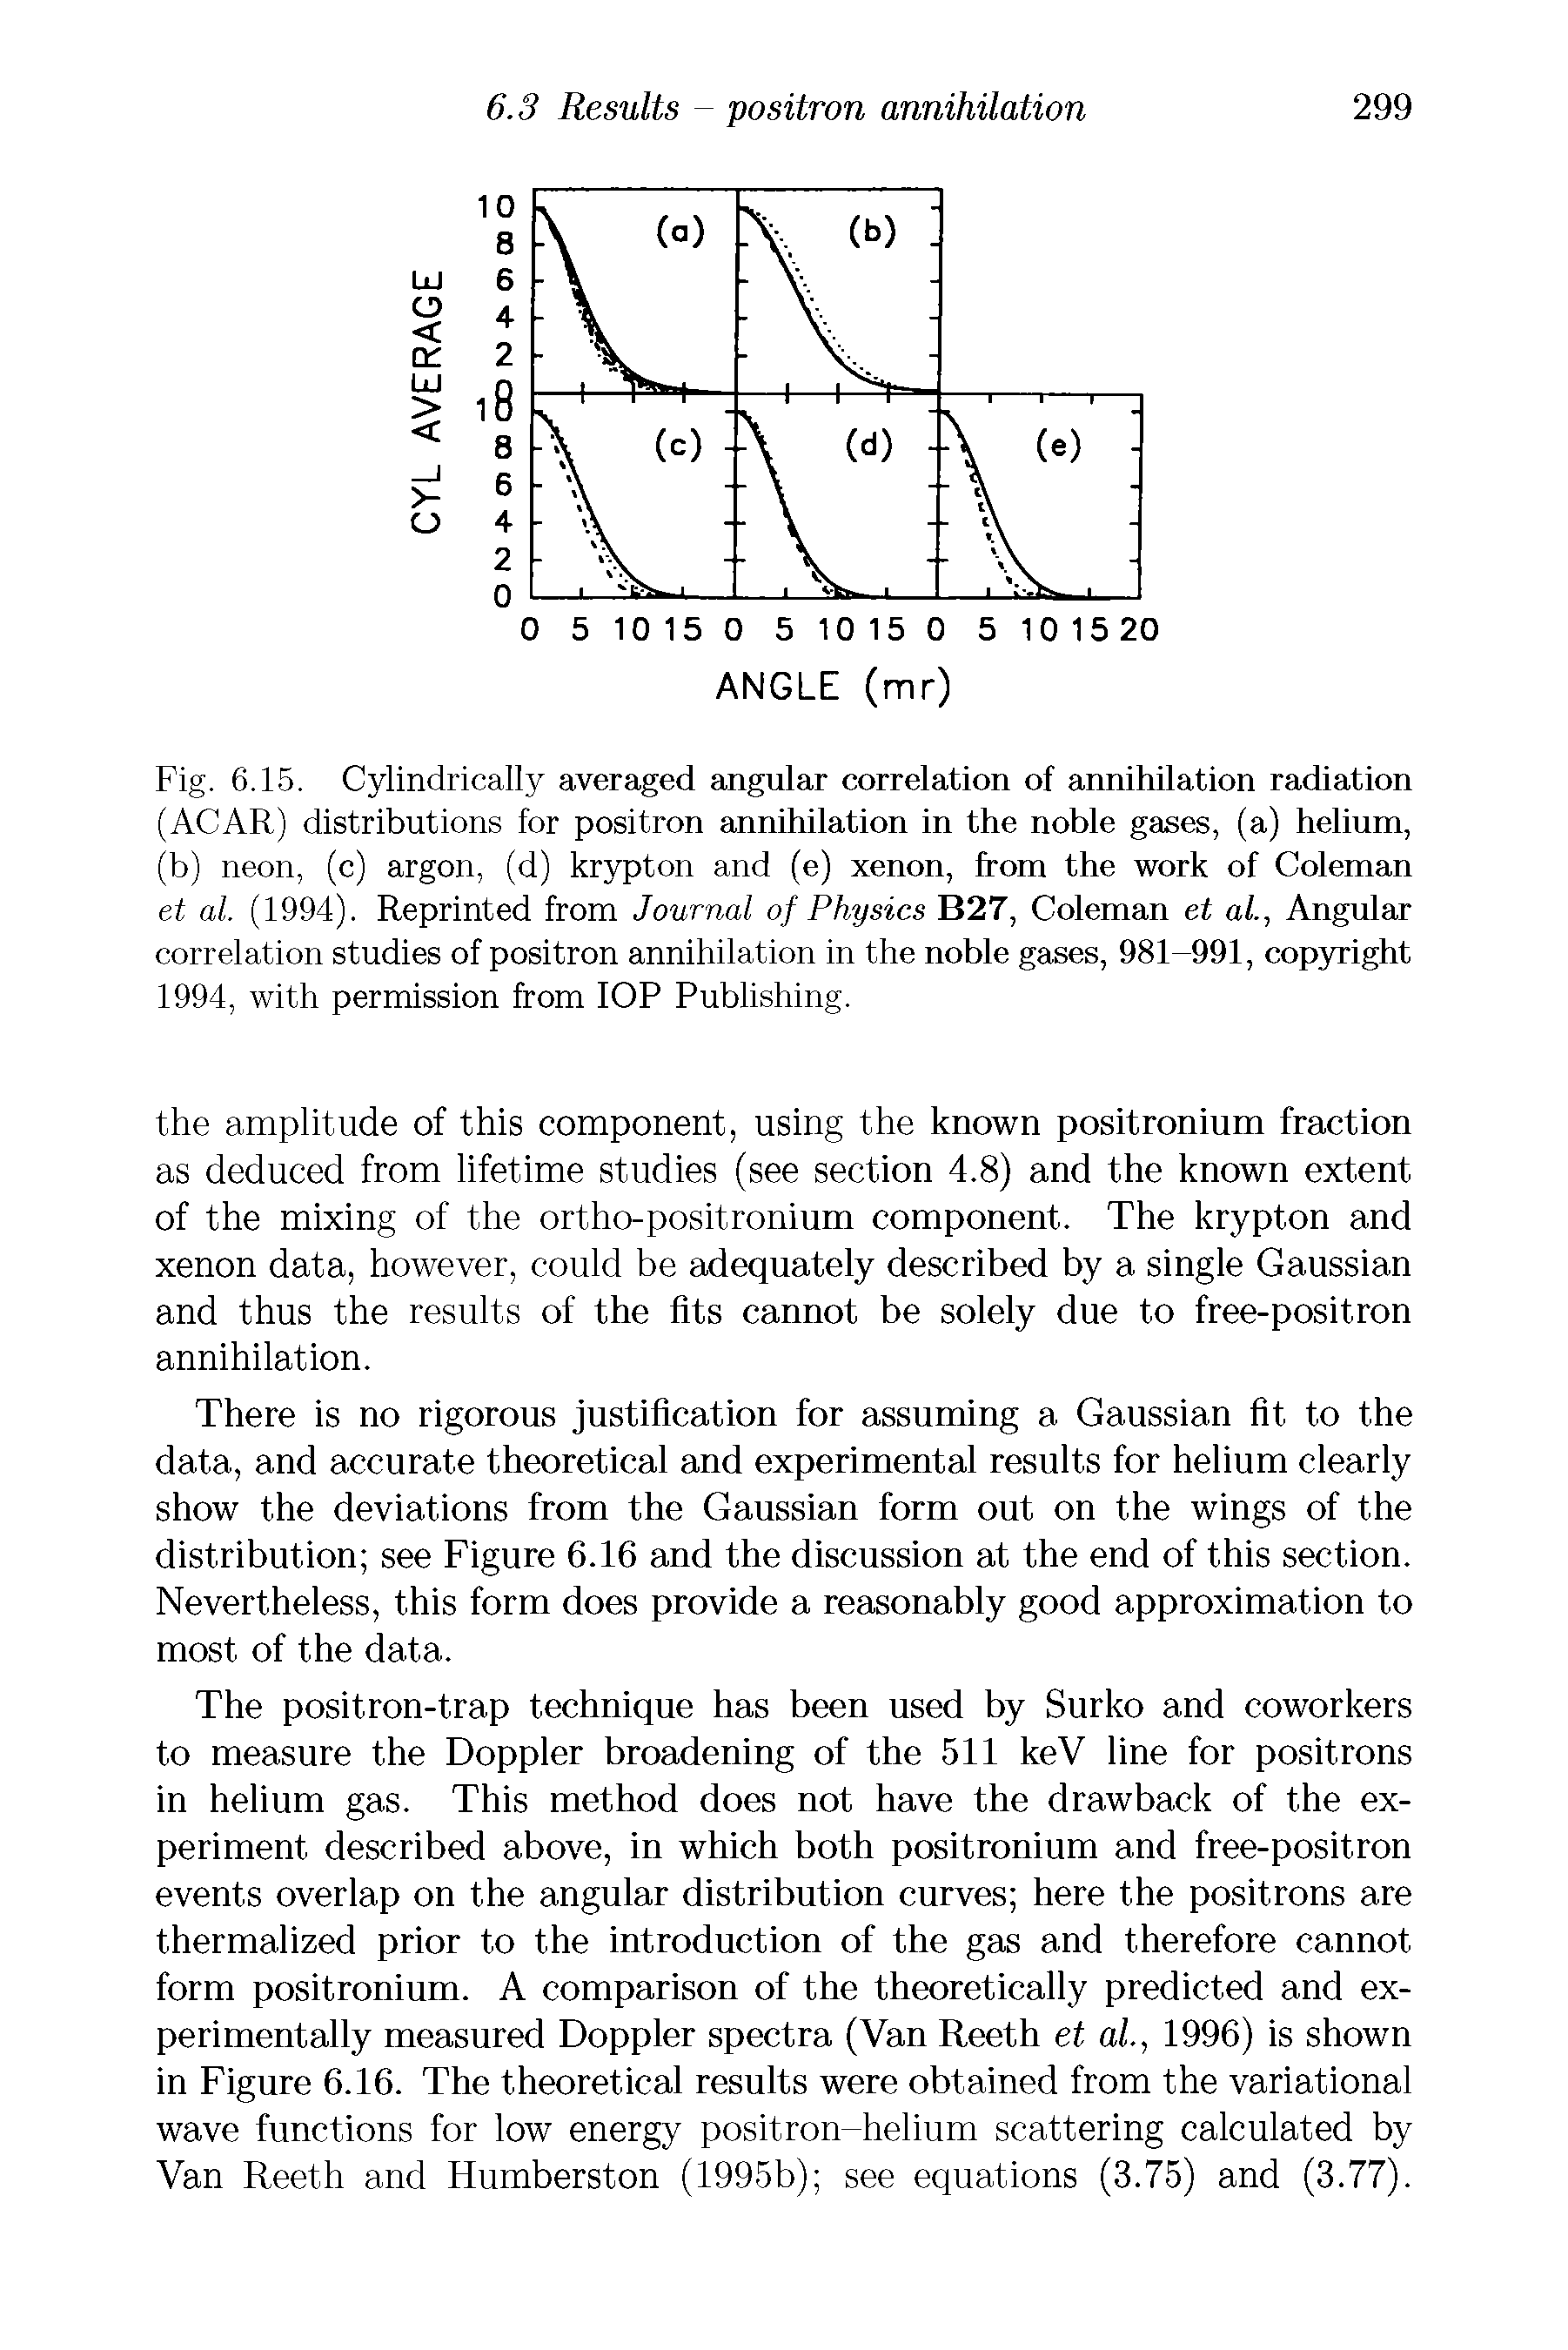 Fig. 6.15. Cylindrically averaged angular correlation of annihilation radiation (ACAR) distributions for positron annihilation in the noble gases, (a) helium, (b) neon, (c) argon, (d) krypton and (e) xenon, from the work of Coleman et al. (1994). Reprinted from Journal of Physics B27, Coleman et al, Angular correlation studies of positron annihilation in the noble gases, 981-991, copyright 1994, with permission from IOP Publishing.